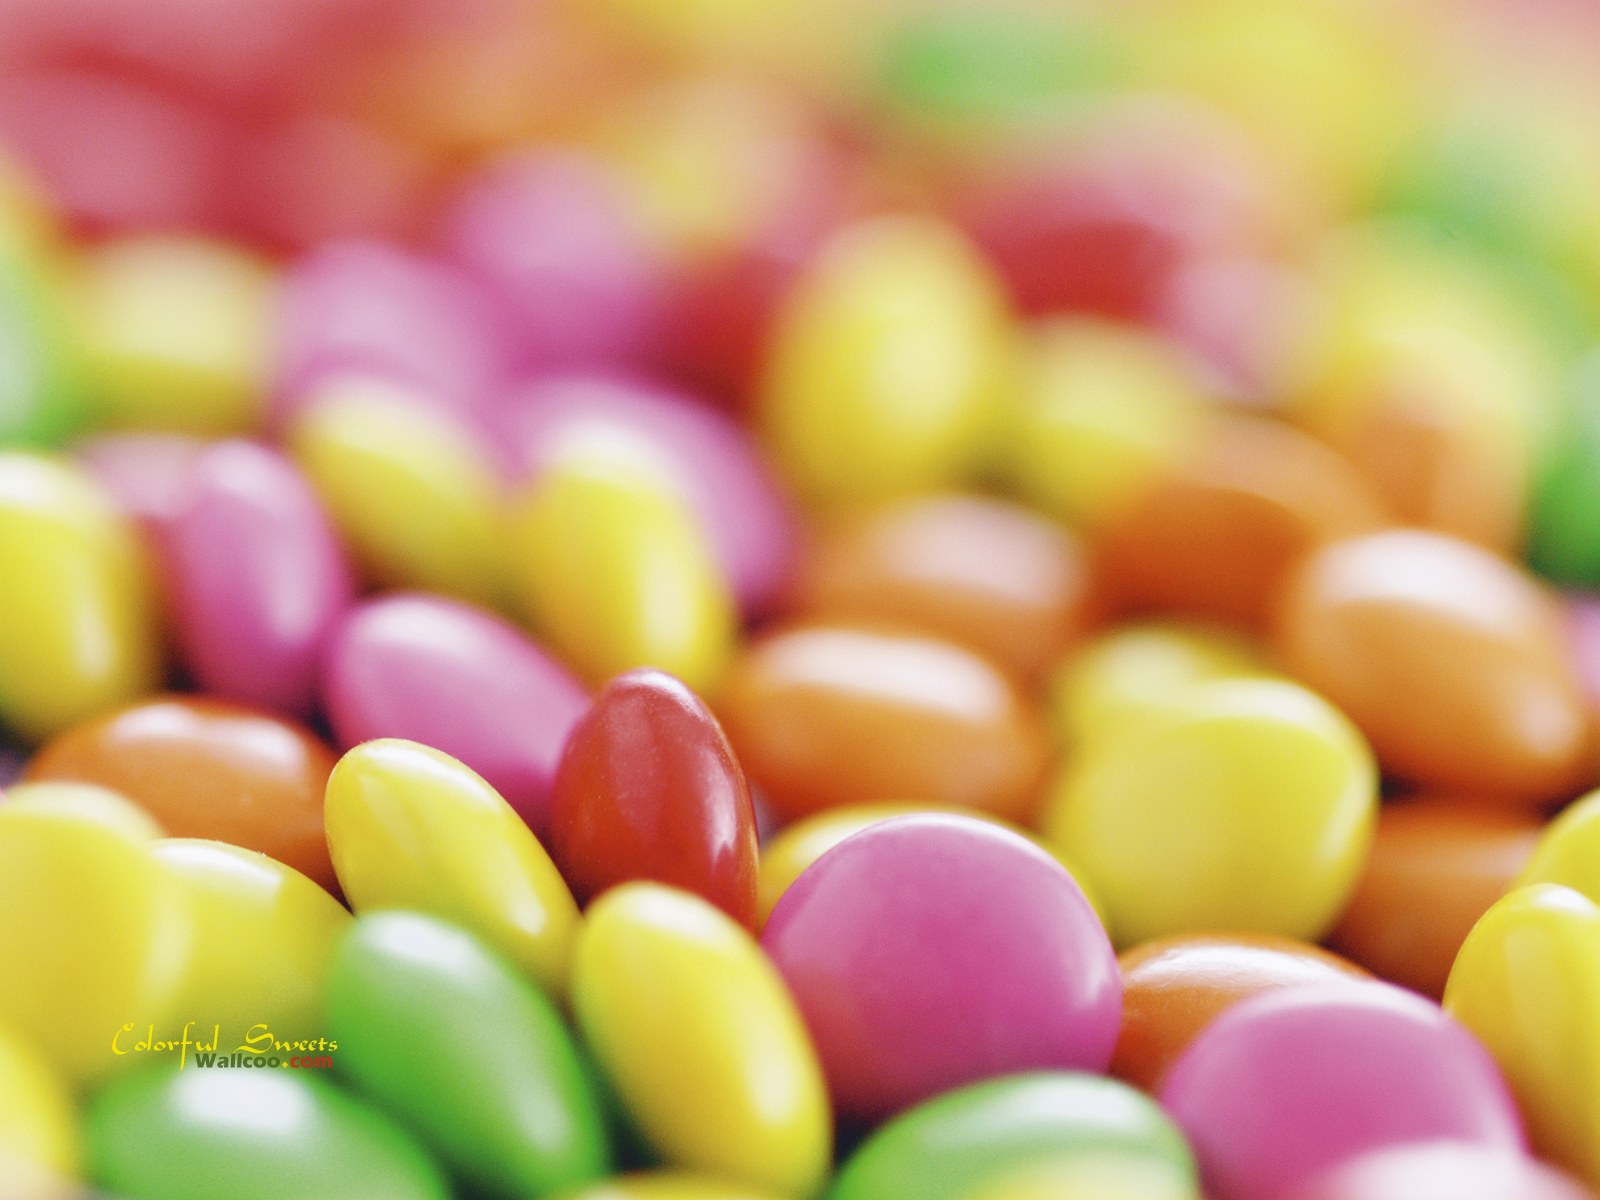 Colorful Sweet Candies